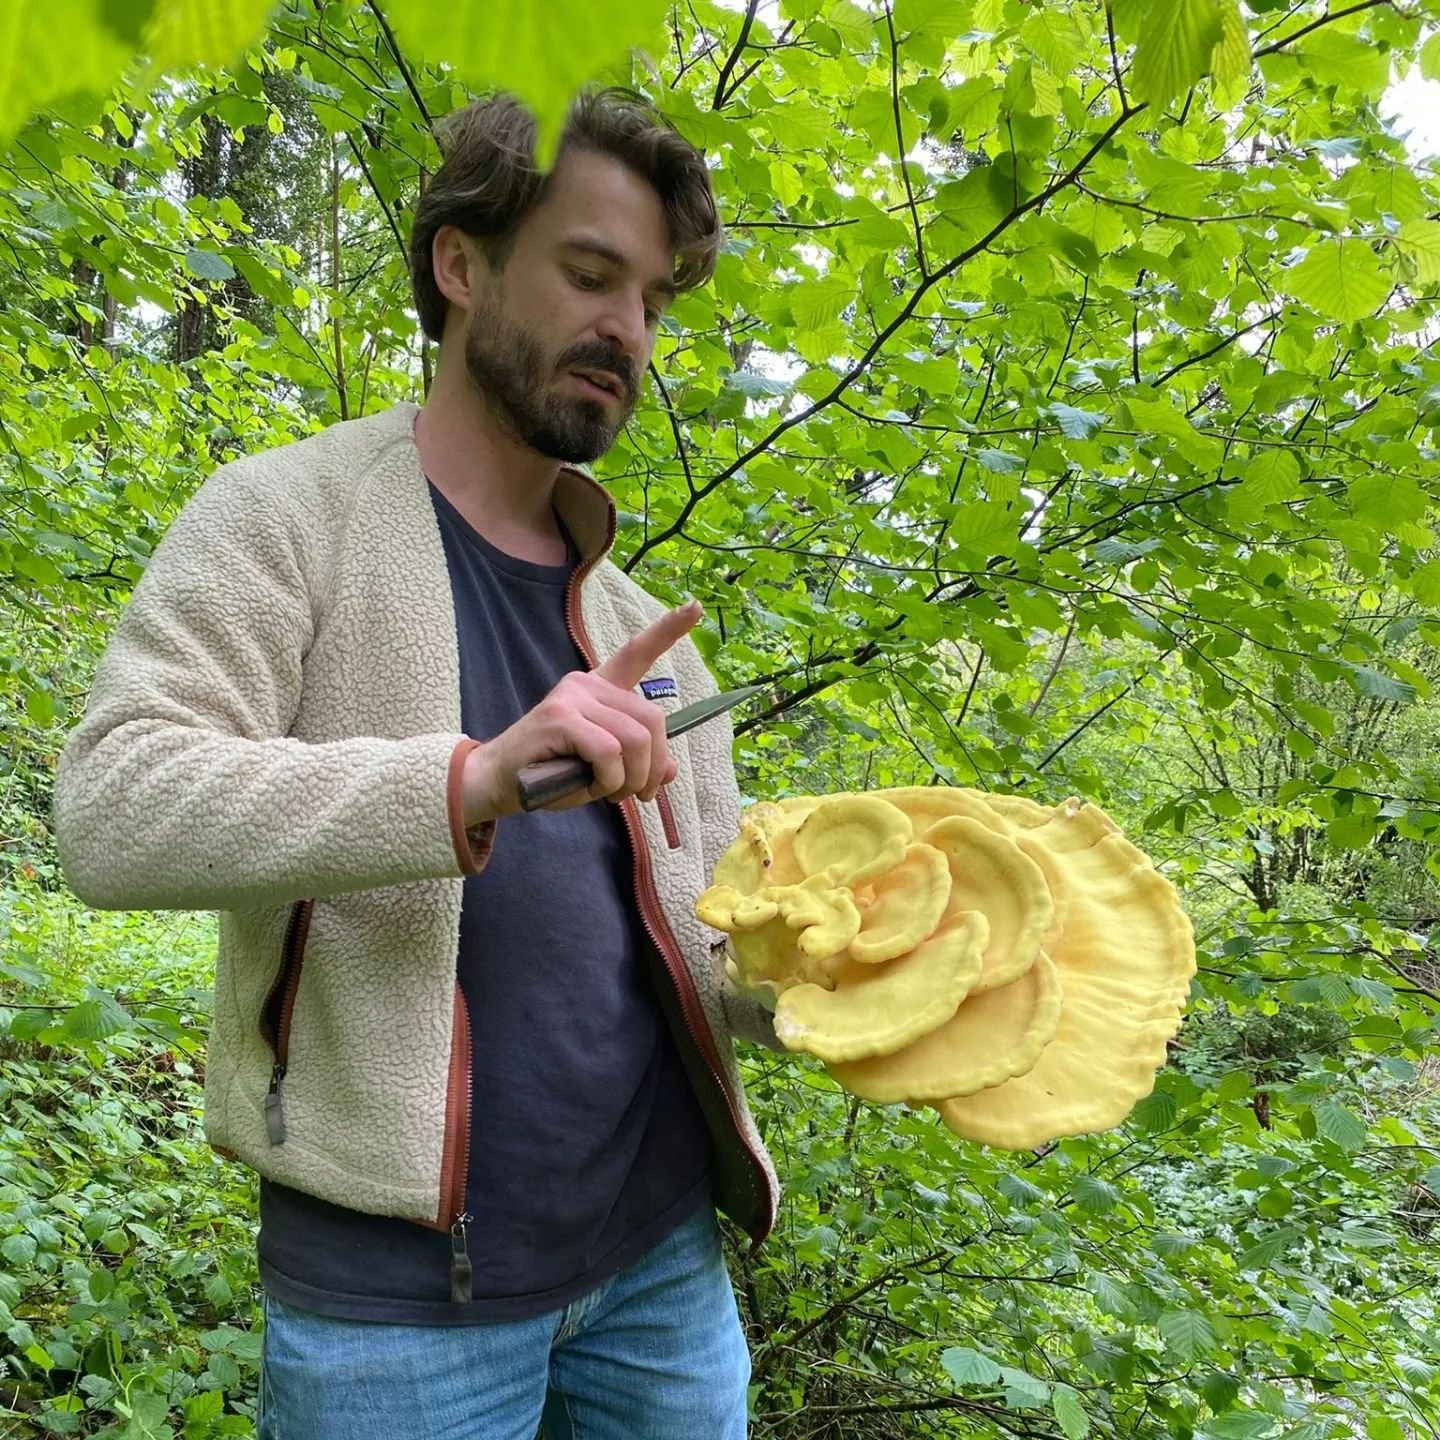 Incredible wildchefs experience!

Being blessed with wild mushrooms like wood ears and chicken of the woods, we could not have been more lucky. 

10 chefs got to play with the best spring plants and mushrooms possible during our 2 day wildchefs cours